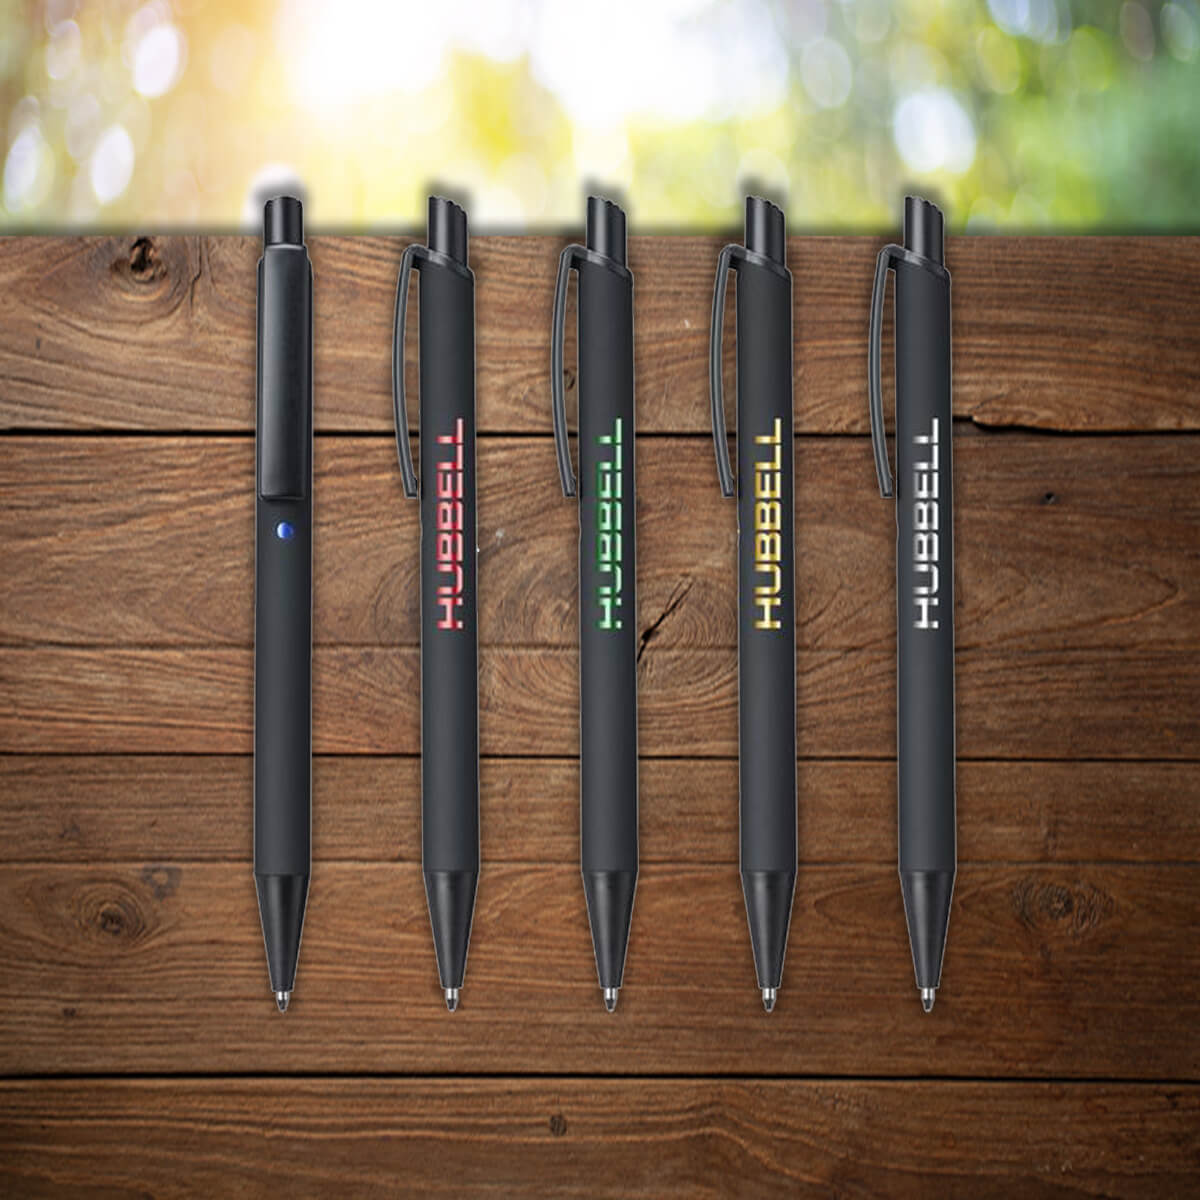 Black metal pens with reflective branding promotional writing implements by curative printing